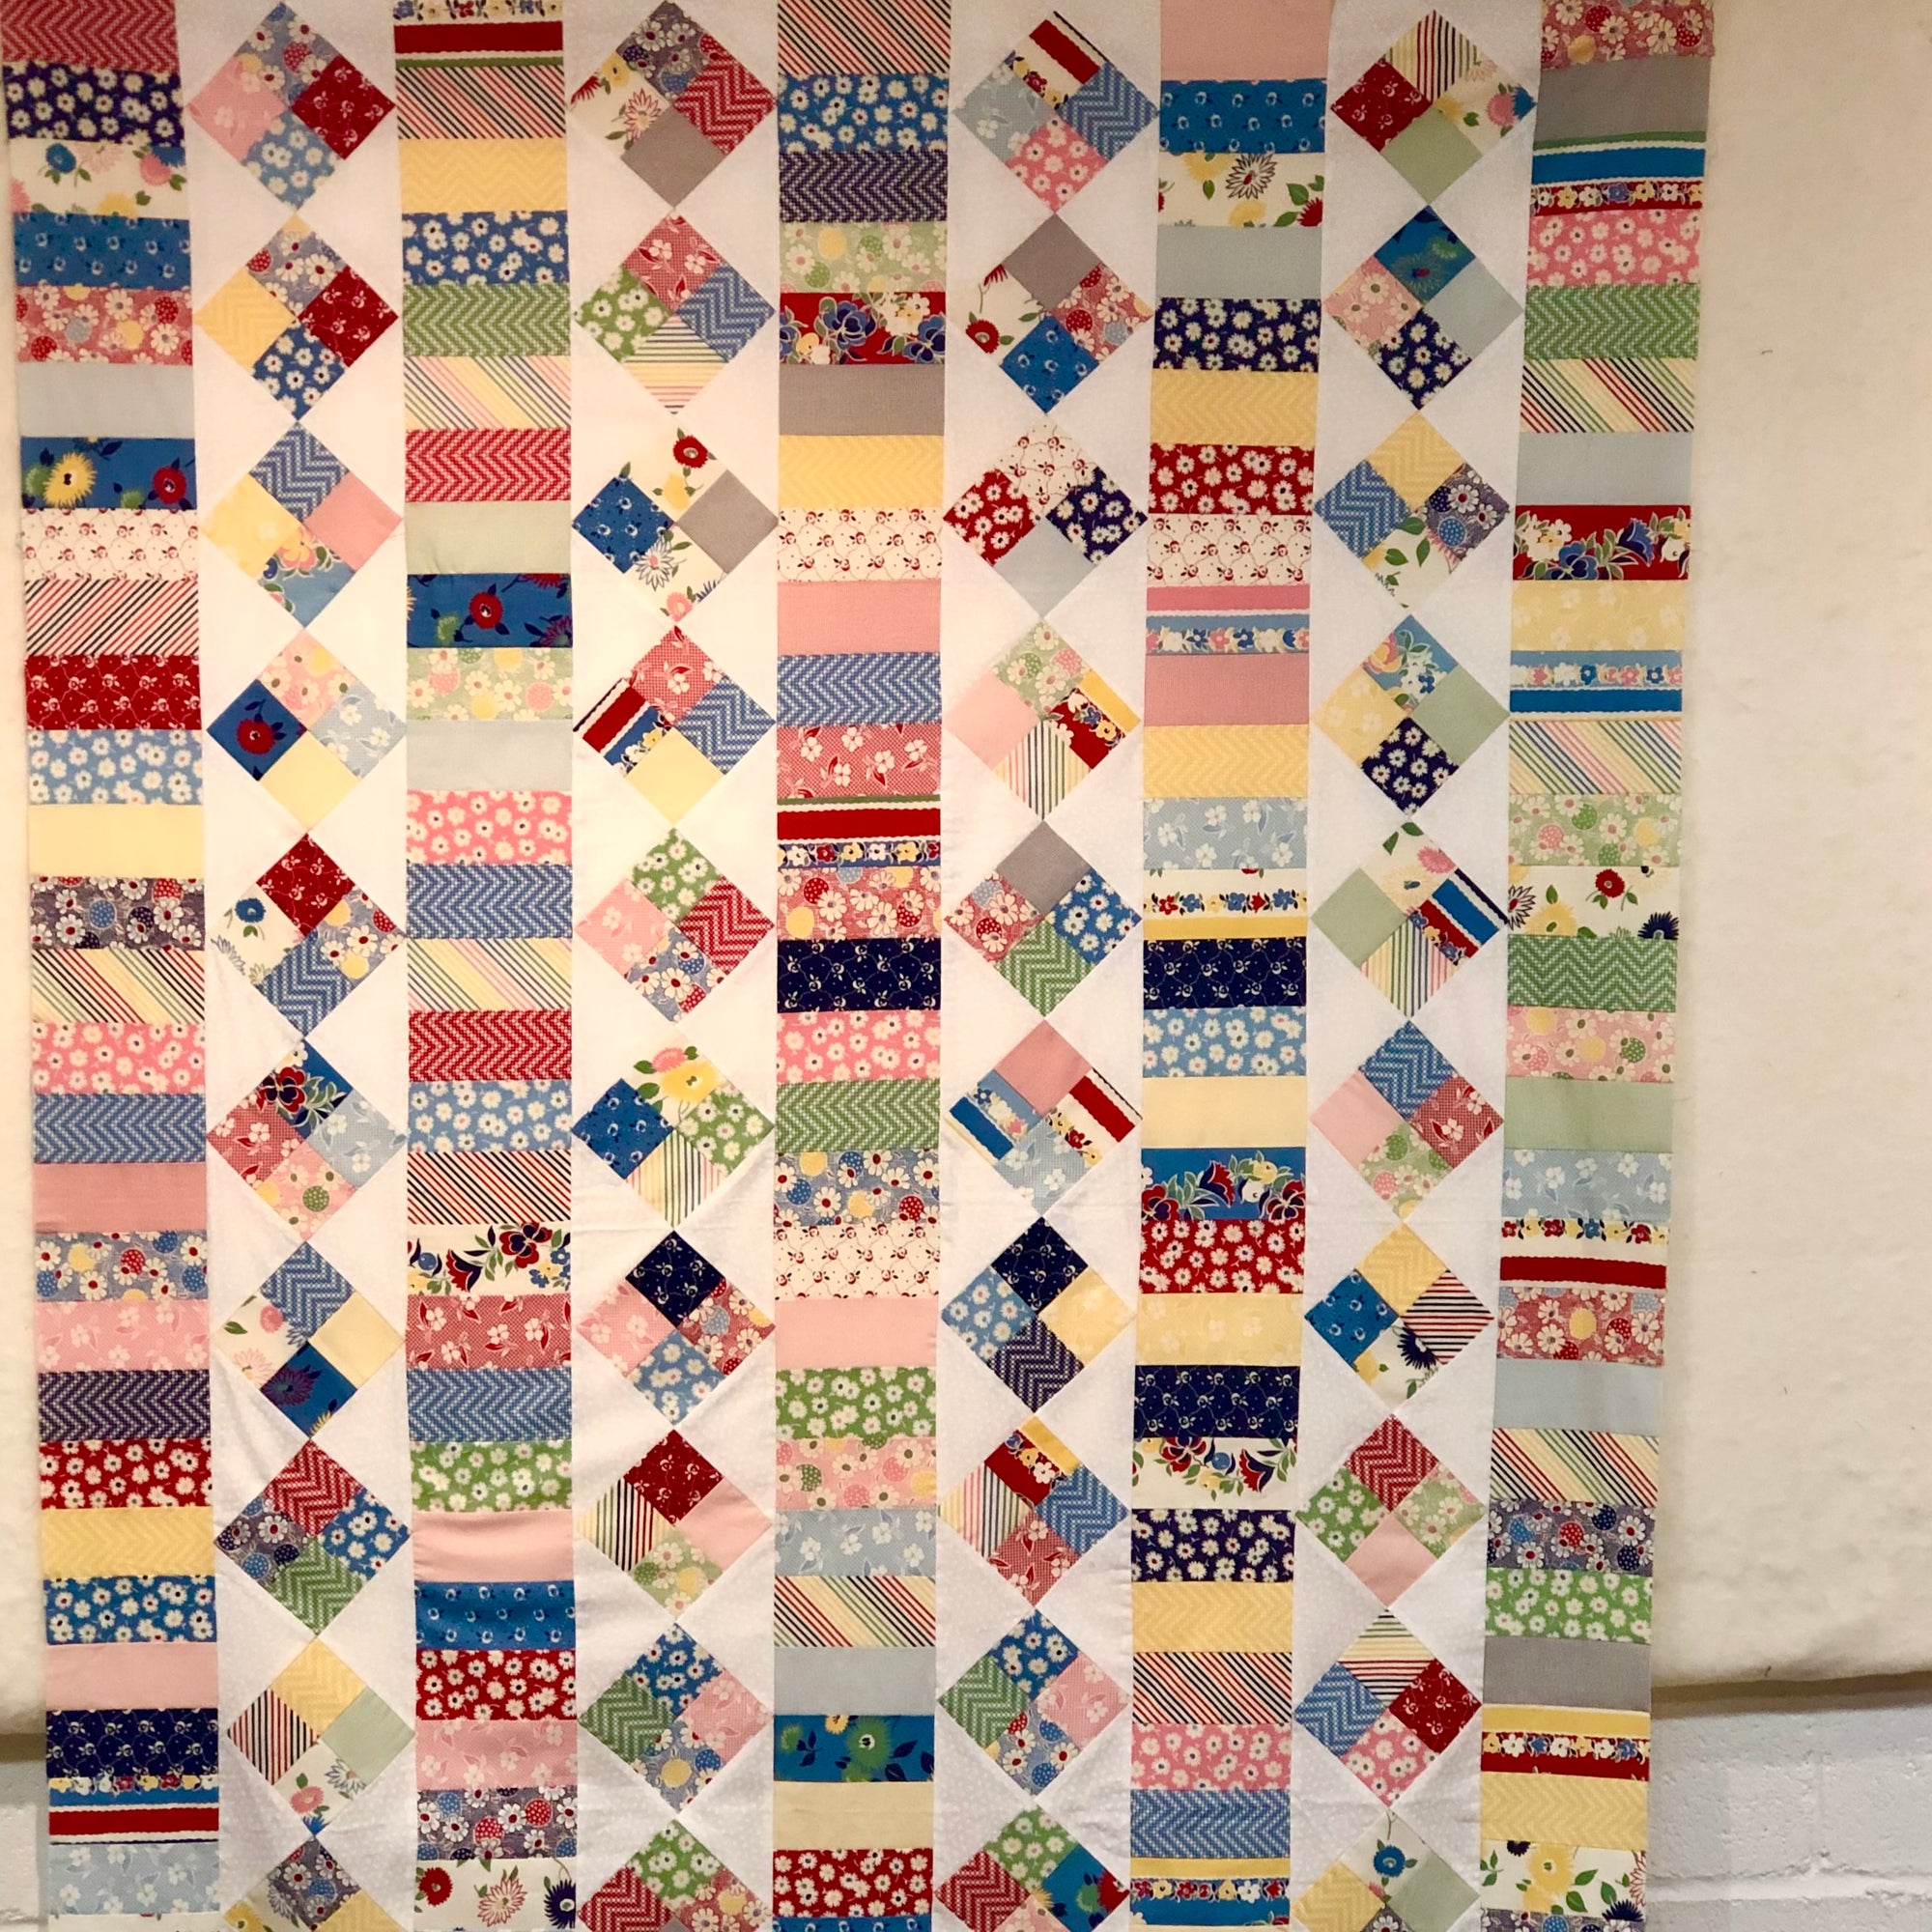 The Charming Quilt - Sunday March 24 & Sunday April 7 1pm to 4:30pm